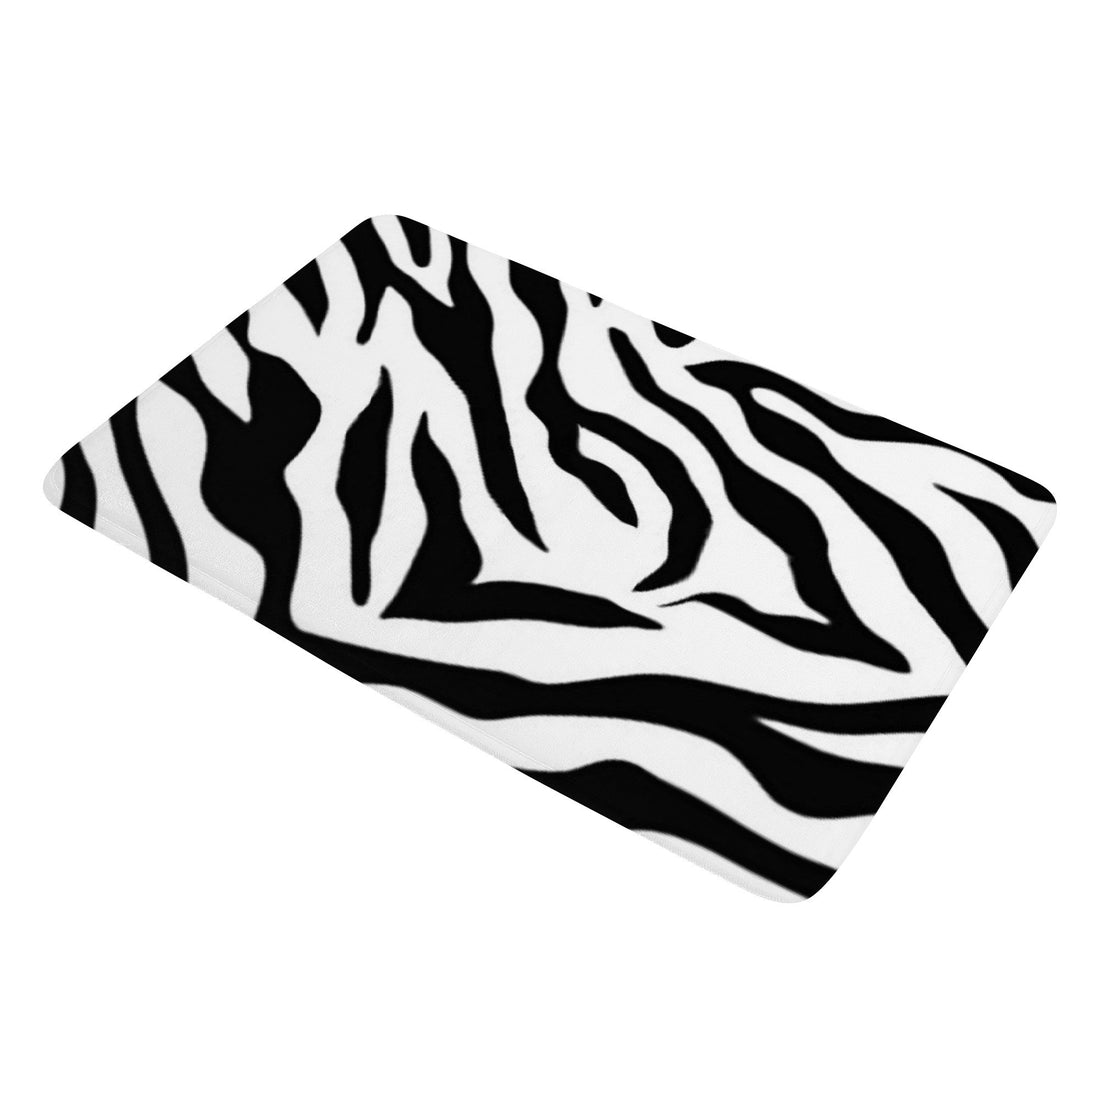 Black and White Zebra Doormat Home-clothes-jewelry